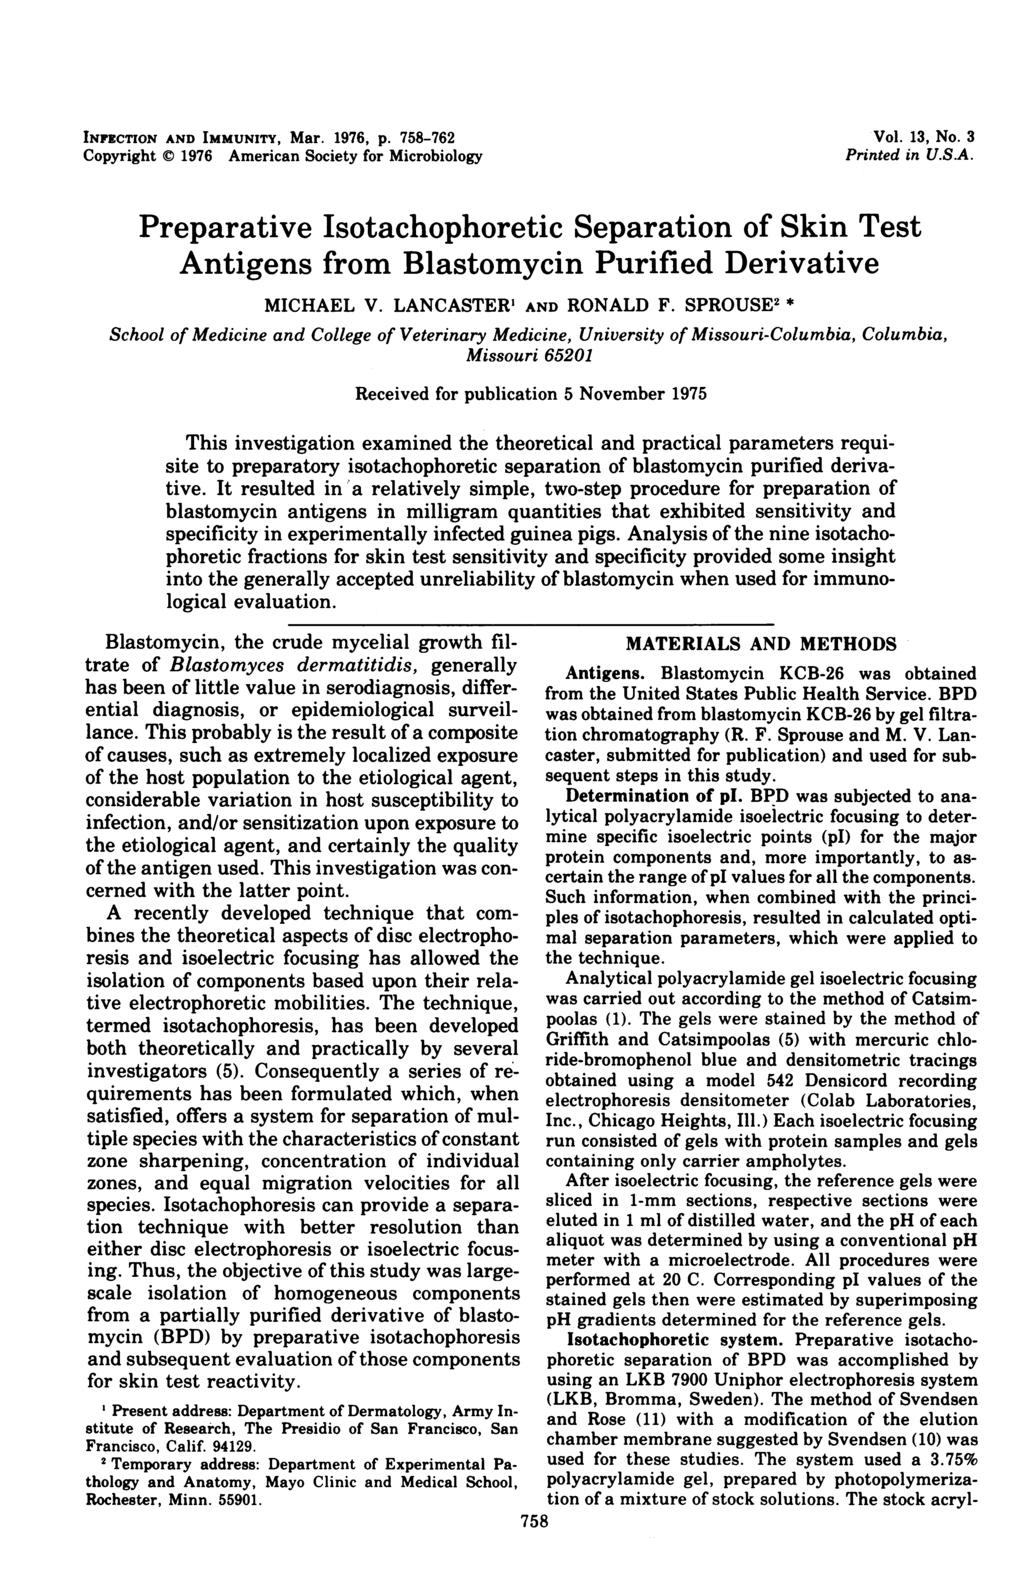 INFECTION AND IMMUNITY, Mar. 1976, p. 758-762 Copyright C 1976 American Society for Microbiology Vol. 13, No. 3 Printed in U.S.A. Preparative Isotachophoretic Separation of Skin Test Antigens from Blastomycin Purified Derivative MICHAEL V.